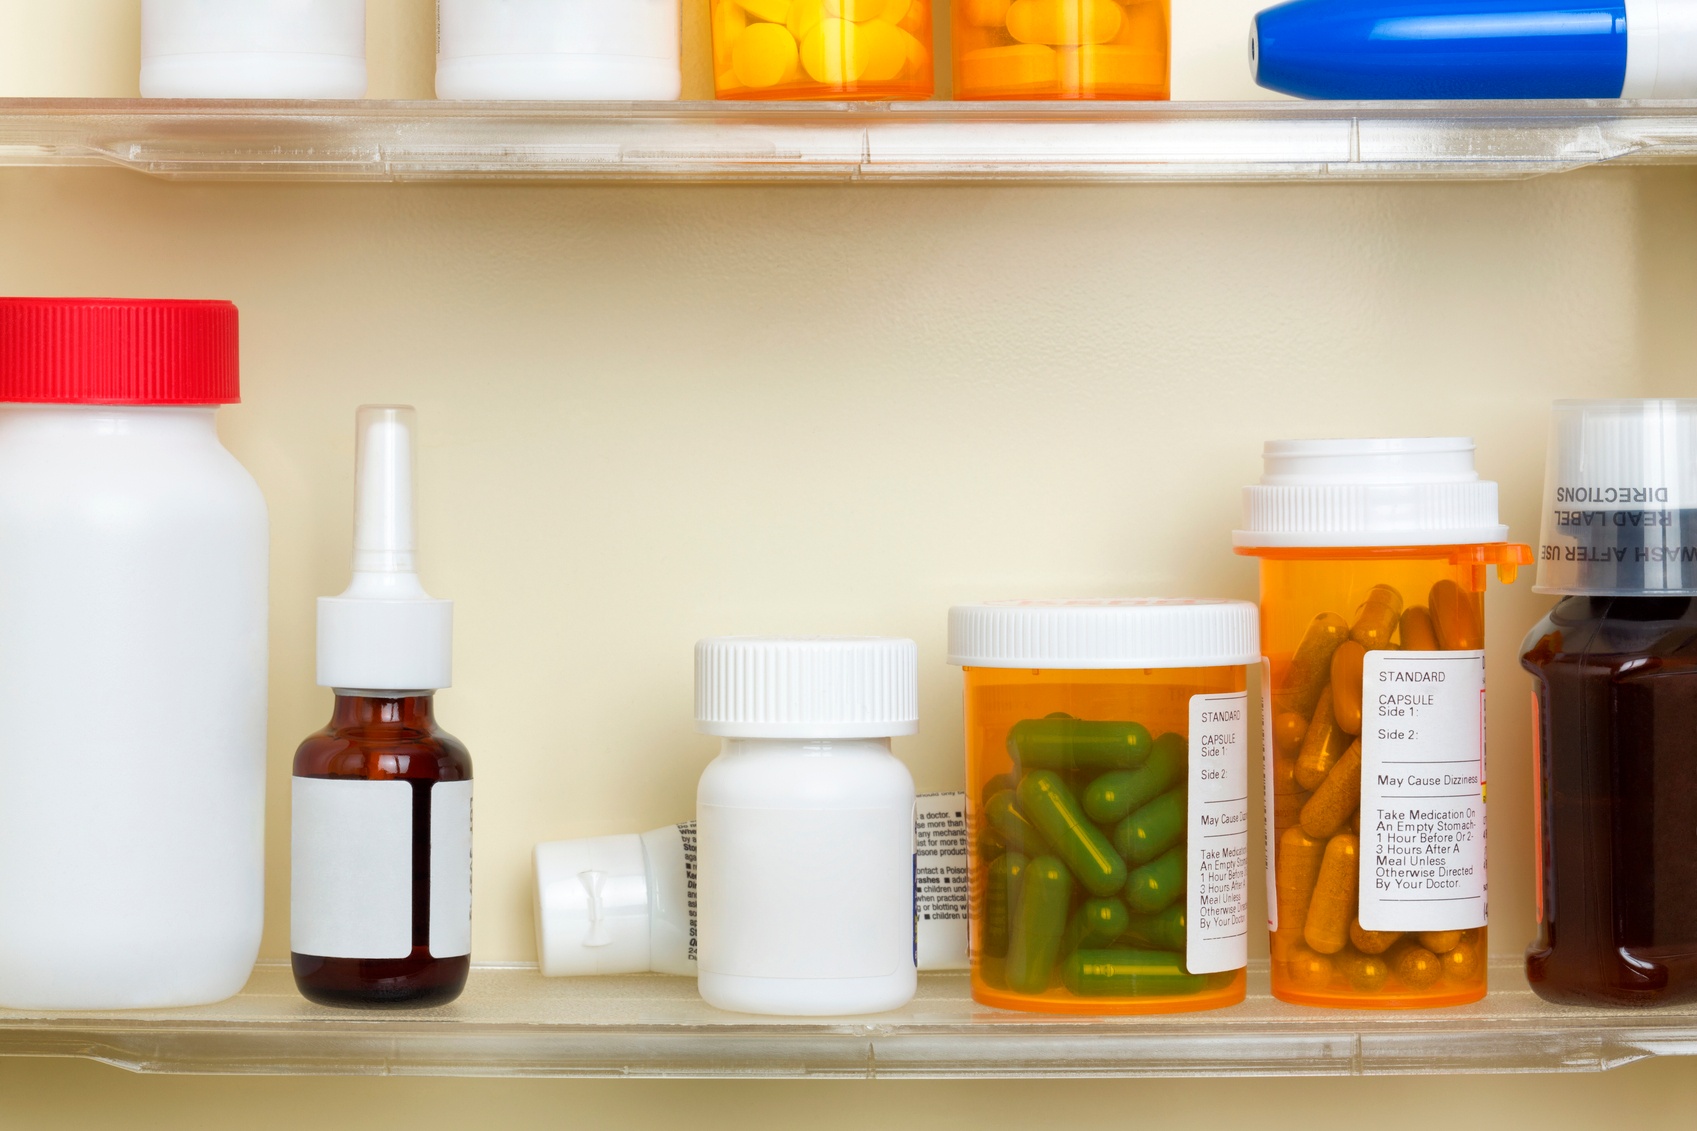 How to Safely Dispose of Medications